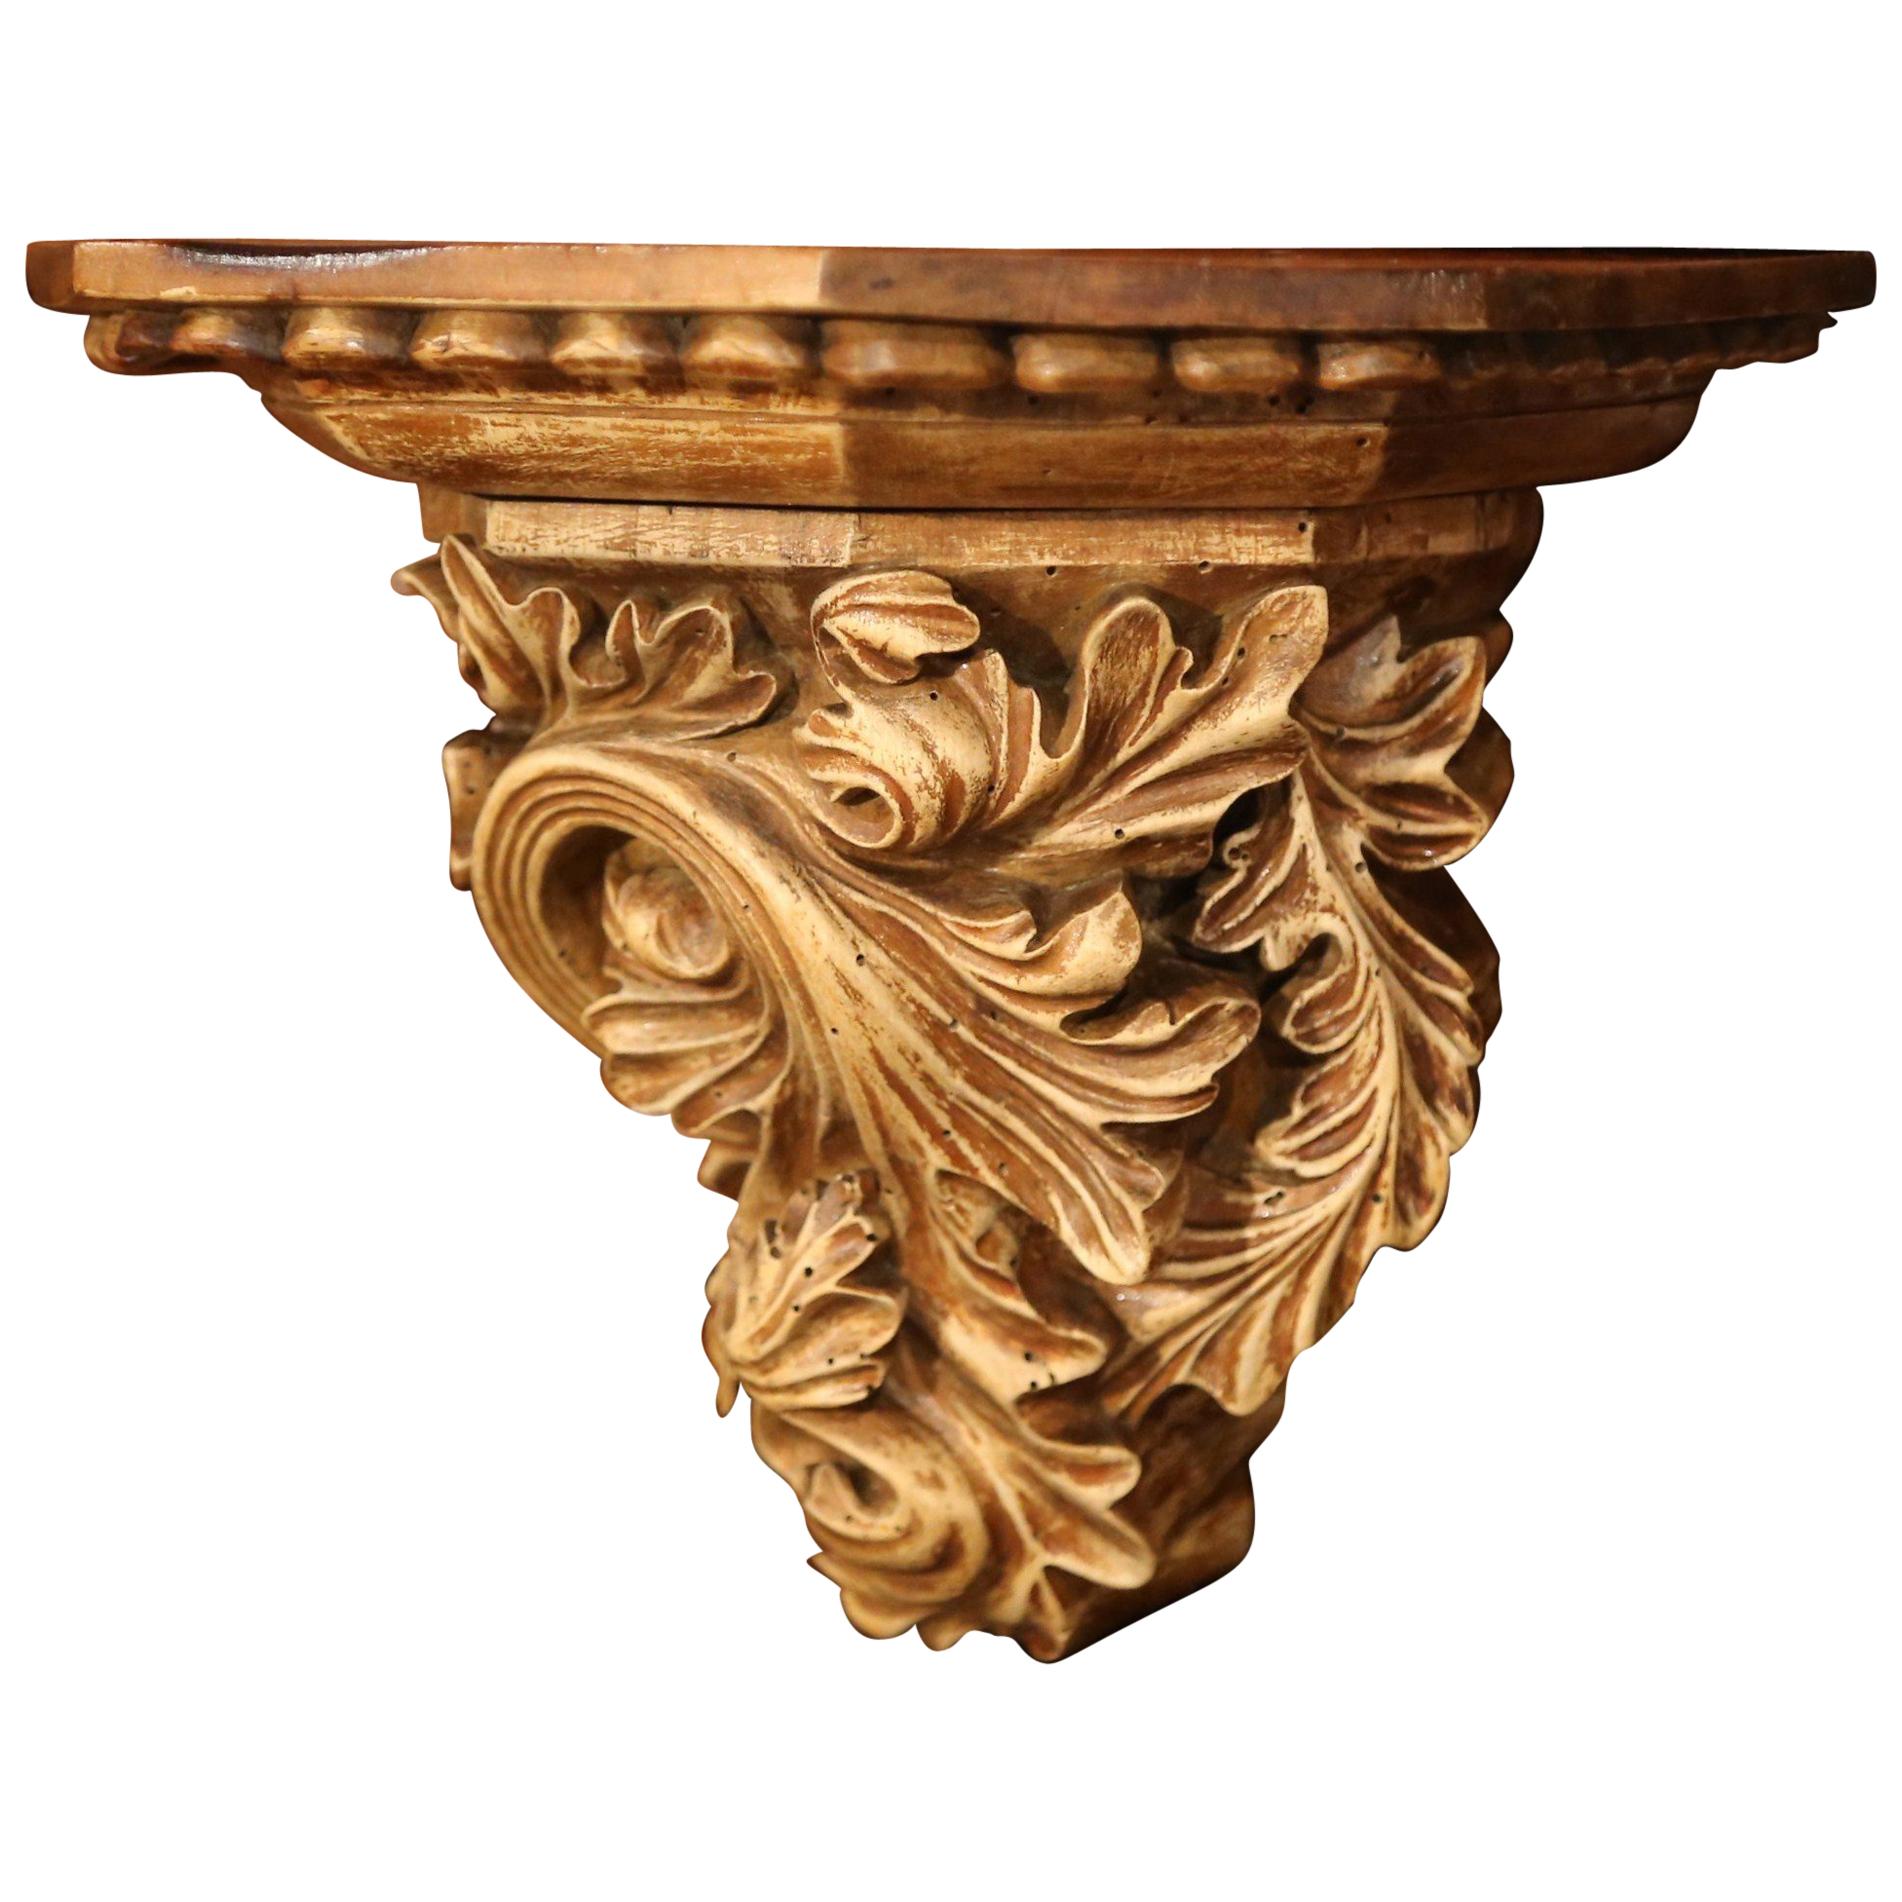 Place a bust or a vase on this elegant antique wall corbel; crafted in France, circa 1860, the fruitwood wall bracket features hand carved leaf motifs with a rich patinated walnut patina. The small console is in good condition, and will accommodate